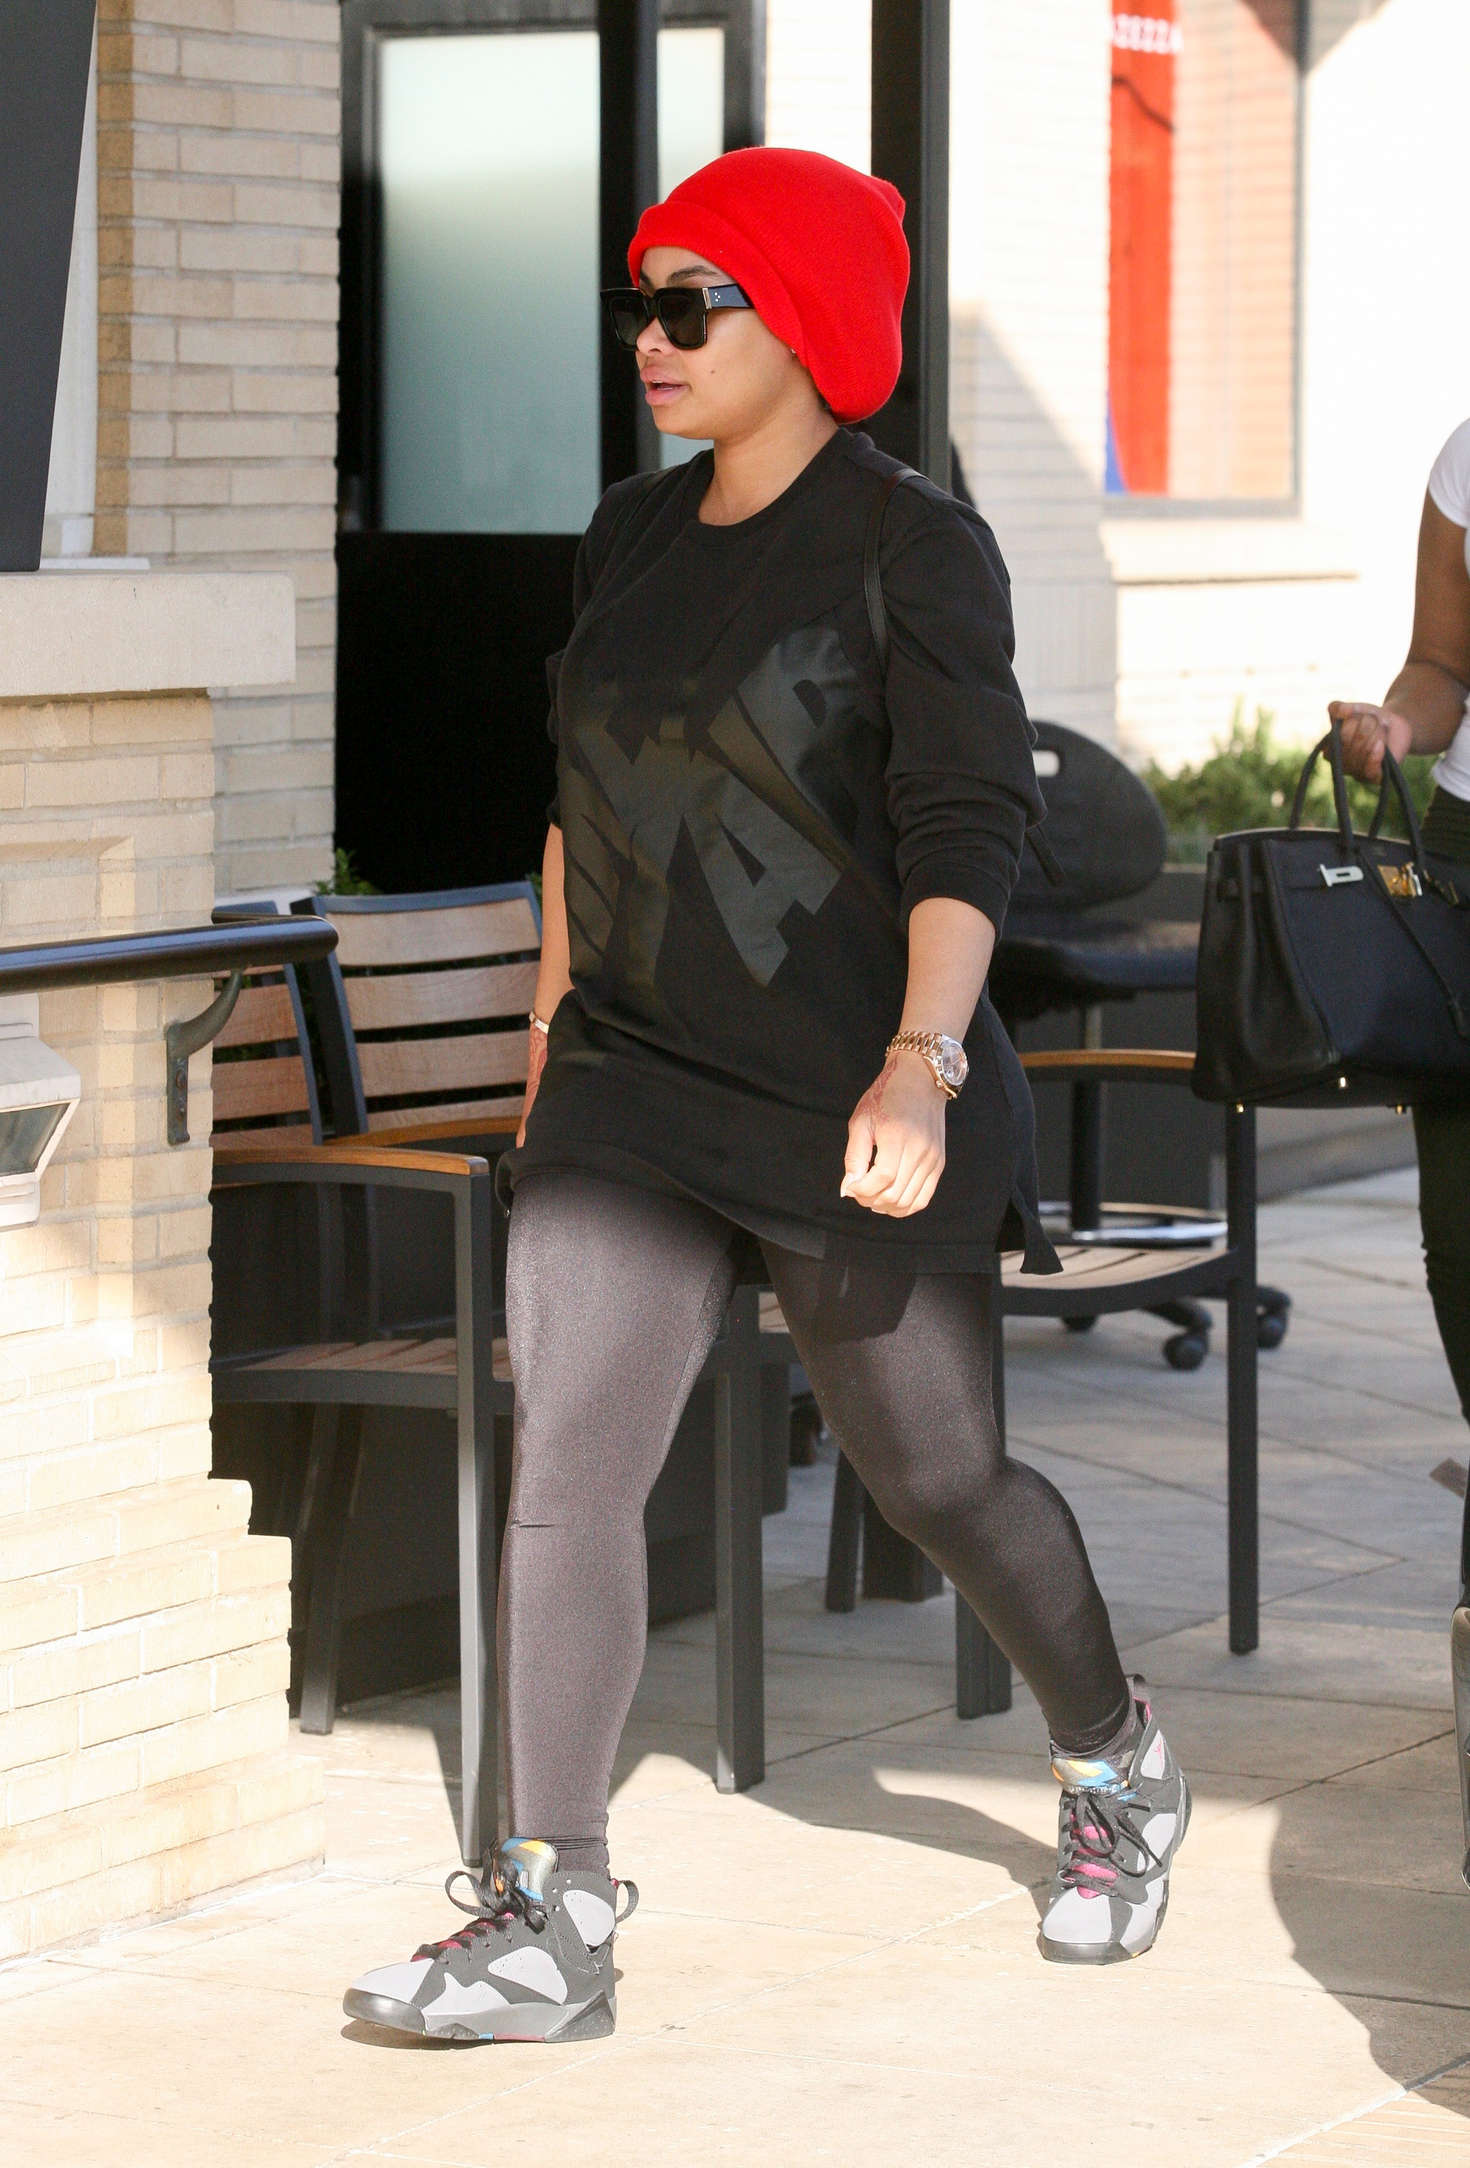 Blac Chyna in Spandex out in LA